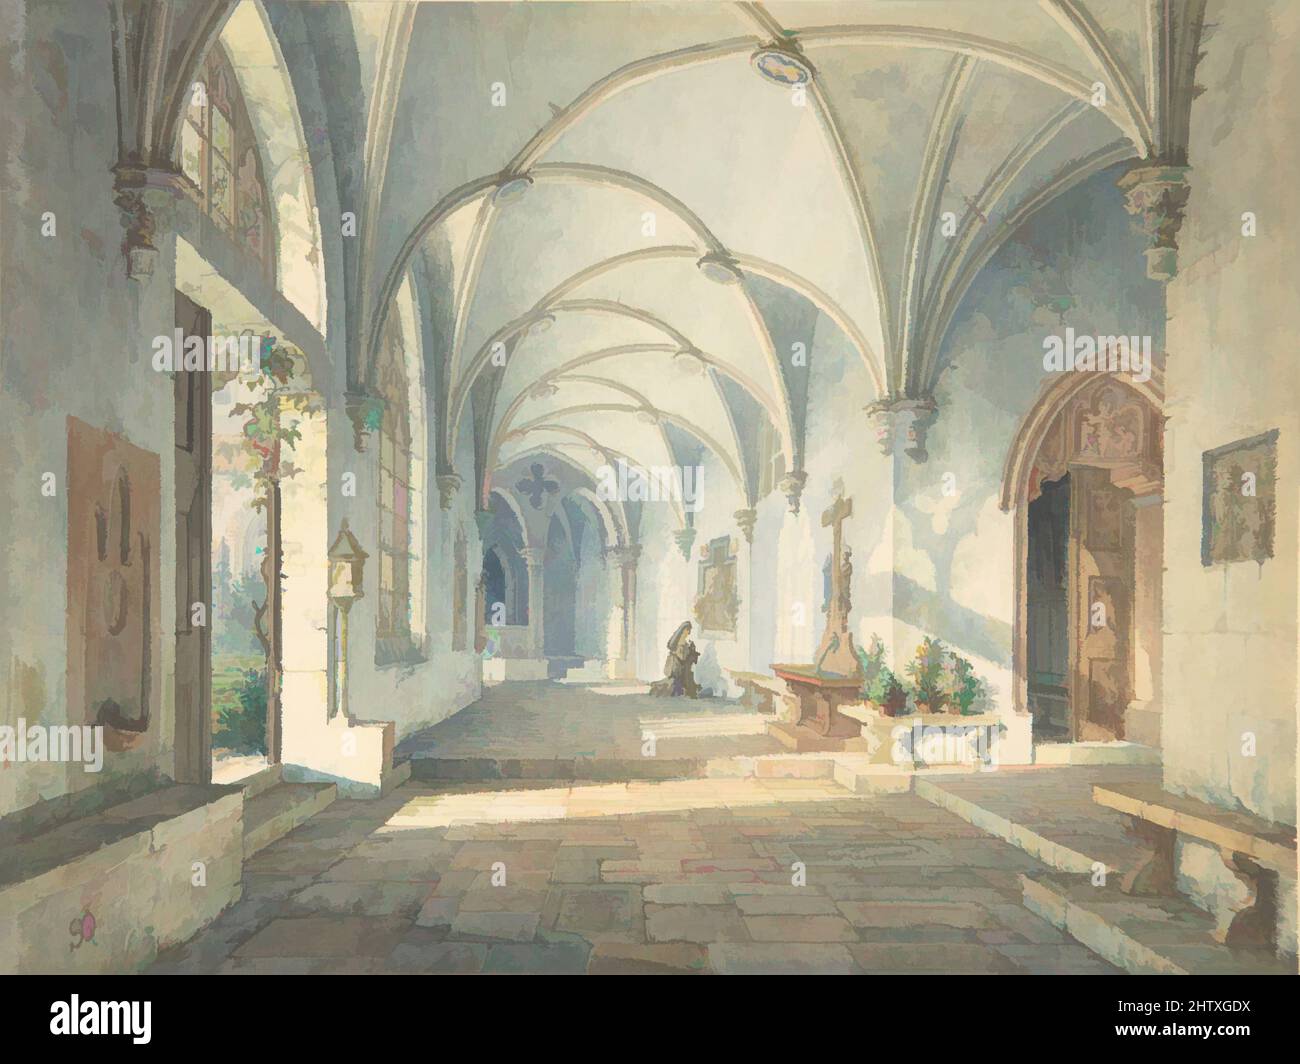 Art inspired by Cloisters in a Nunnery, ca. 1835, Watercolor, Drawings, Simon Quaglio (German, Munich 1795–1878 Munich, Classic works modernized by Artotop with a splash of modernity. Shapes, color and value, eye-catching visual impact on art. Emotions through freedom of artworks in a contemporary way. A timeless message pursuing a wildly creative new direction. Artists turning to the digital medium and creating the Artotop NFT Stock Photo